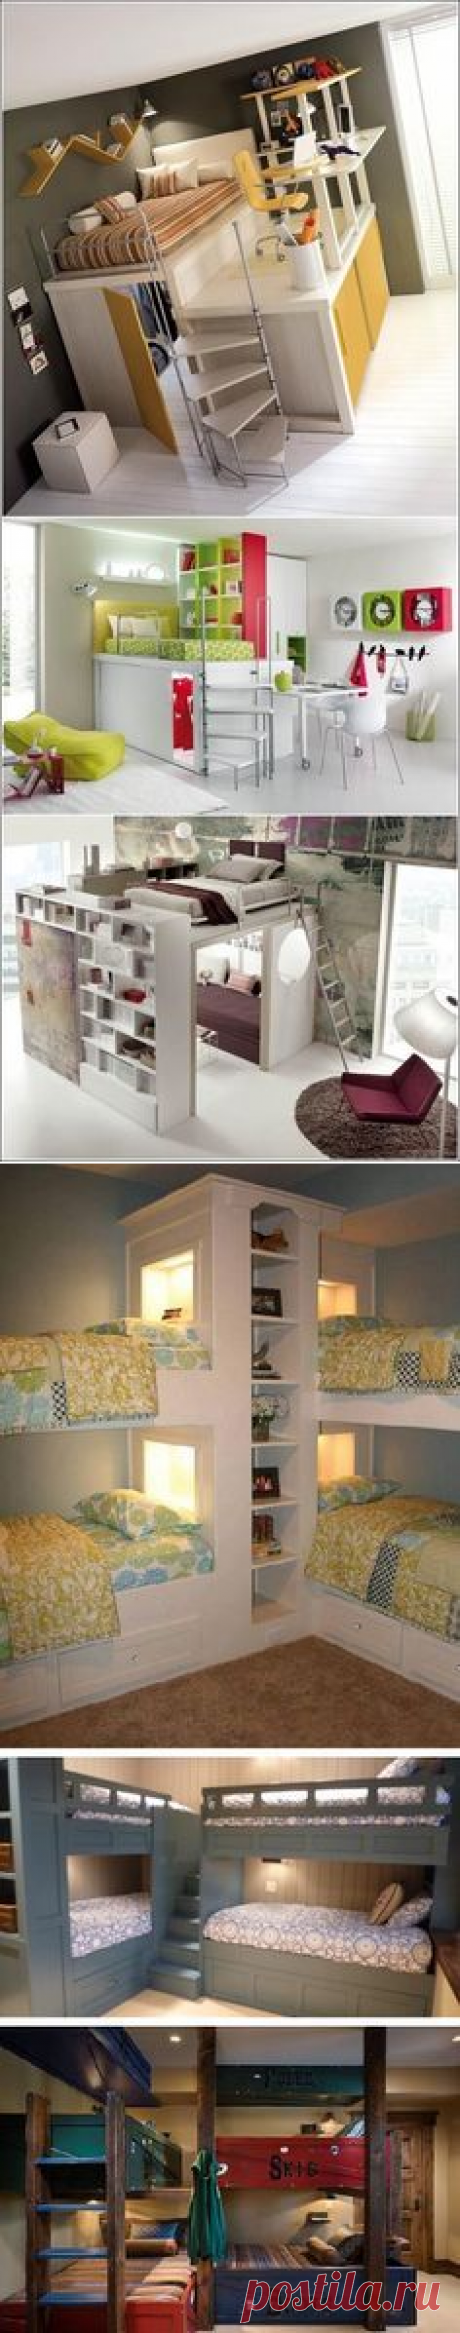 (34) Kids Rooms: Shared Bedroom Solutions